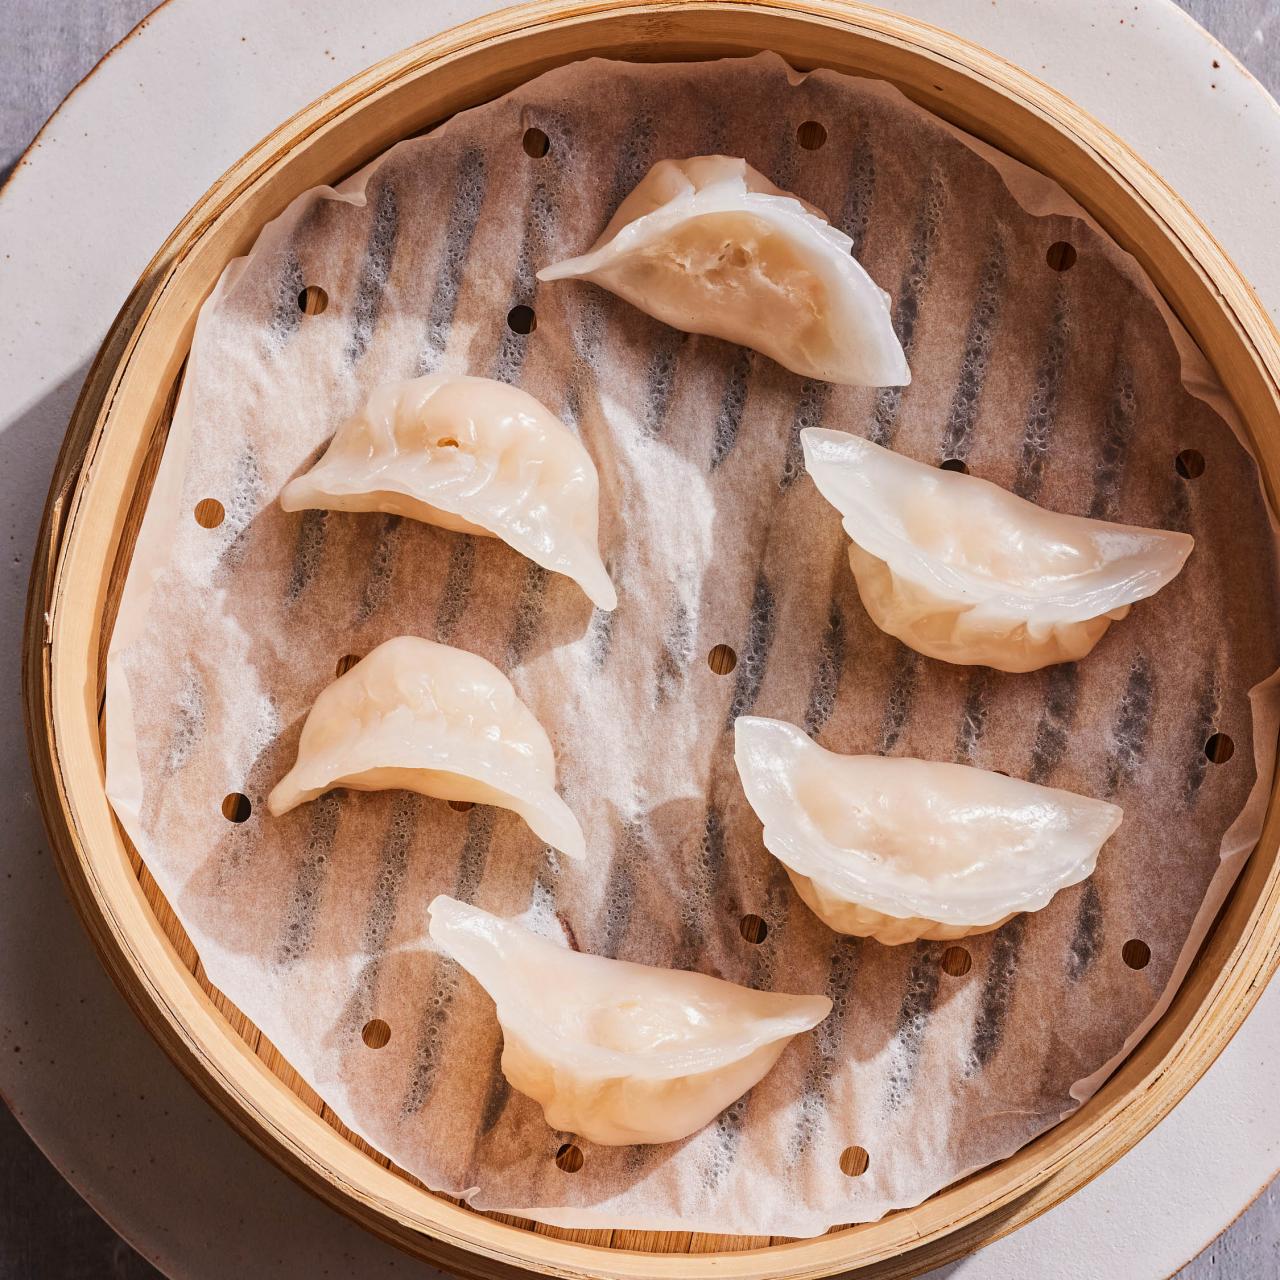 17 Recipes for Making a Dim Sum at Home